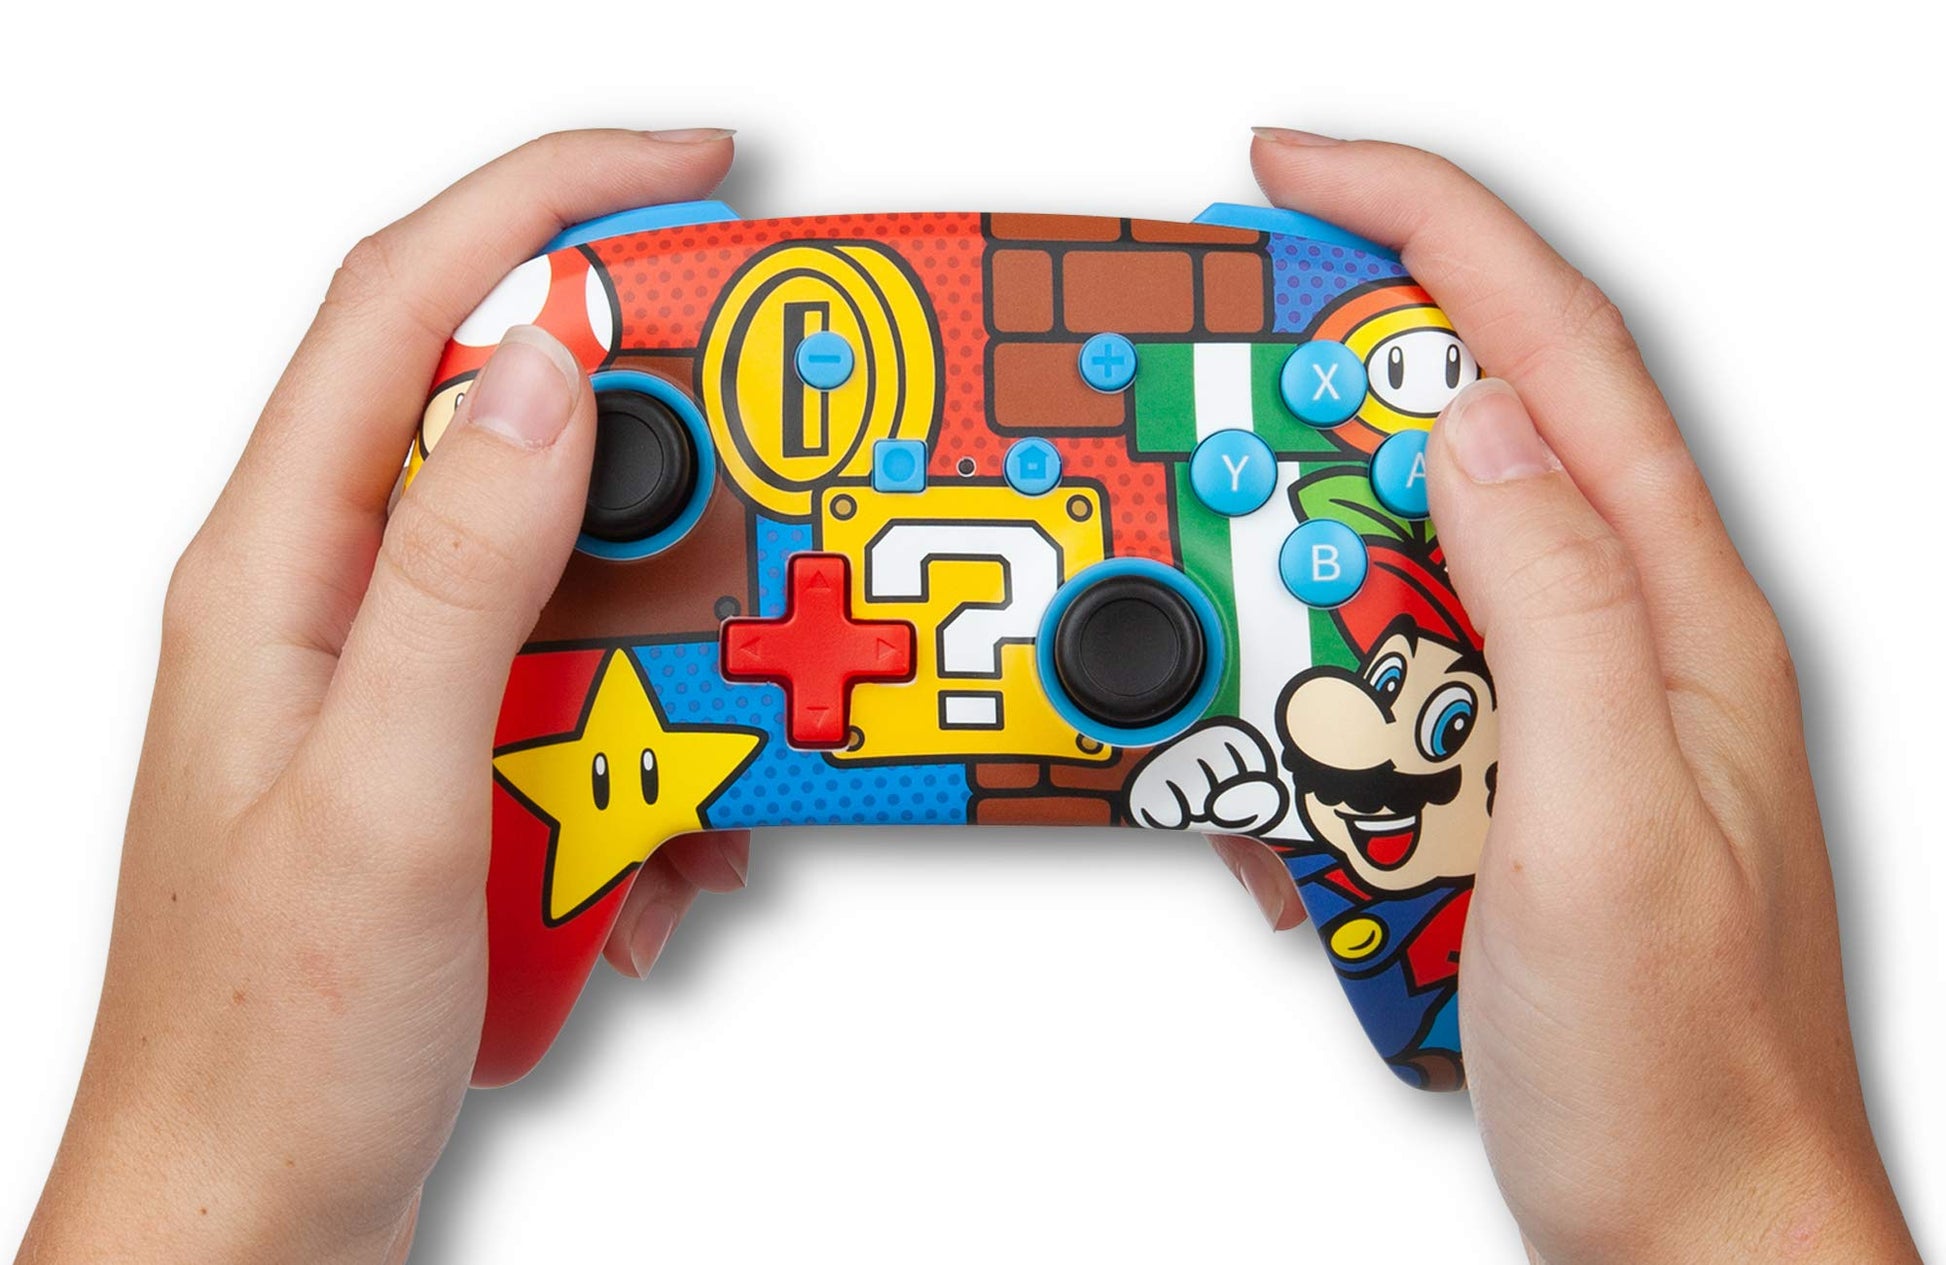 PowerA Enhanced Wireless Nintendo Switch Controller - Mario Pop, Rechargeable Switch Pro Controller, Immersive Motion Control and Advanced Gaming Buttons, Officially Licensed by Nintendo - amzGamess